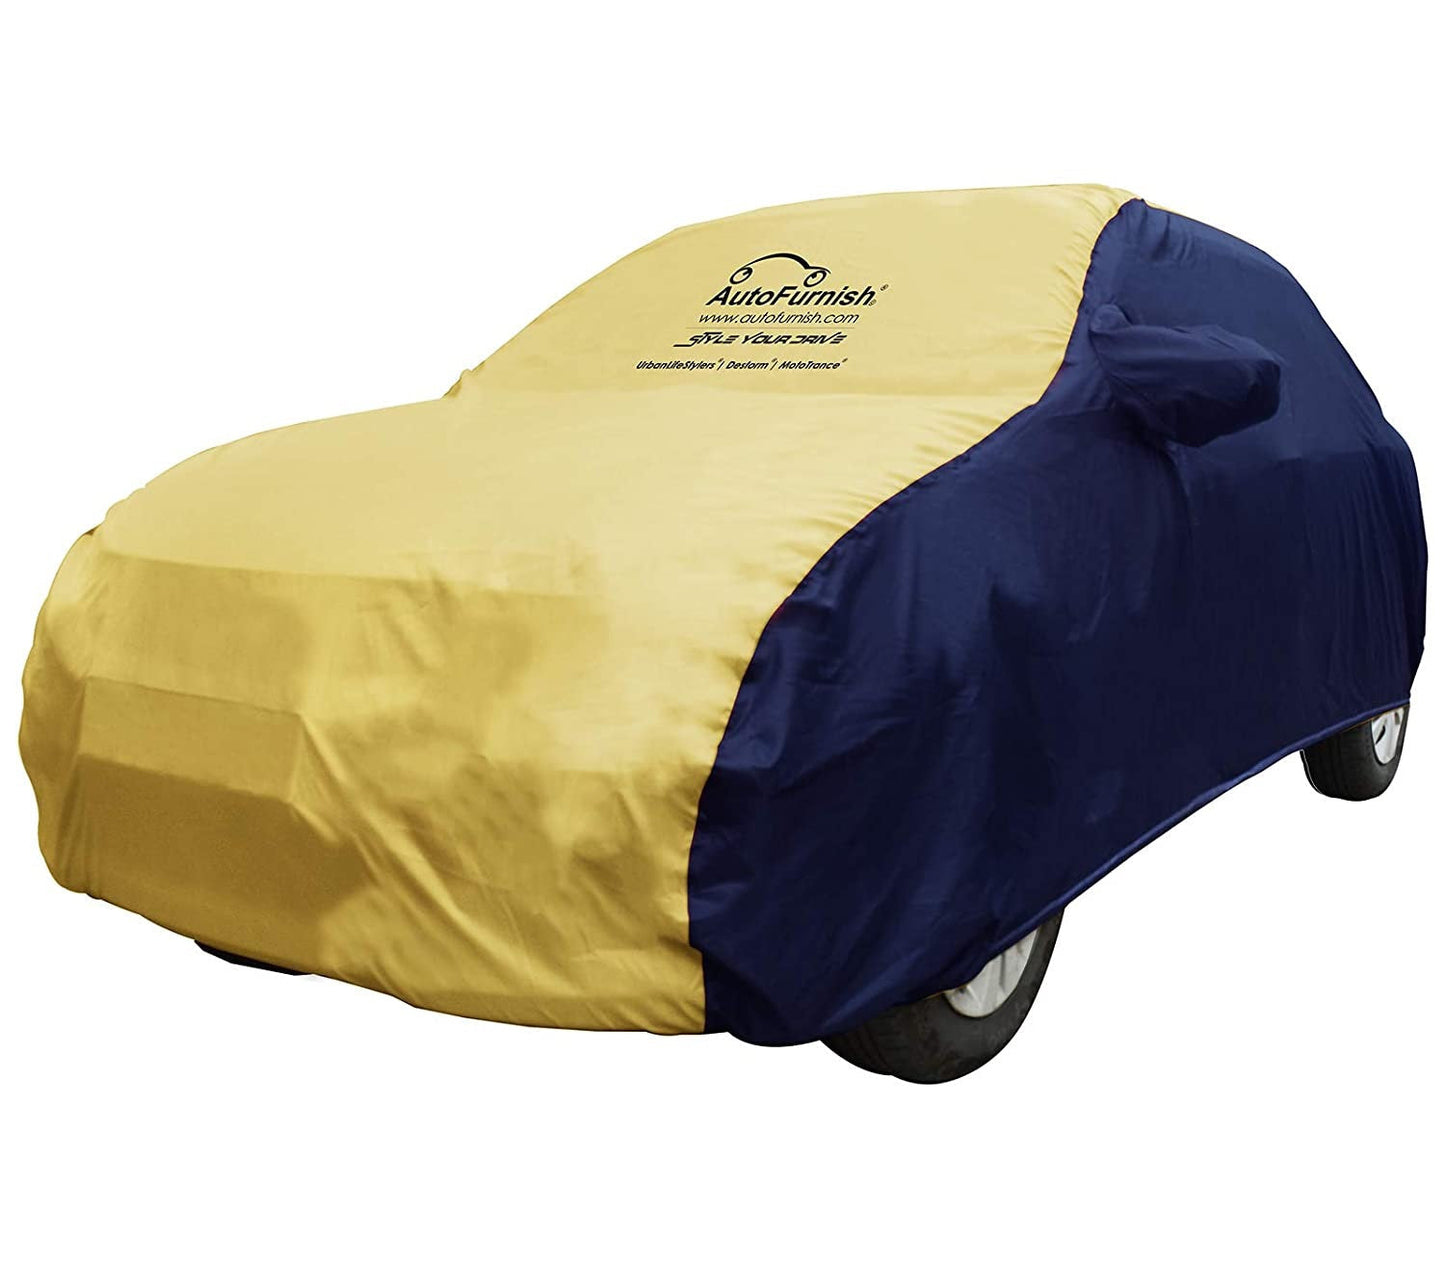 BMW 6 Series GT (2019) Car Body Cover, Triple Stitched, Heat & Water Resistant with Side Mirror Pockets (SPORTY Series)